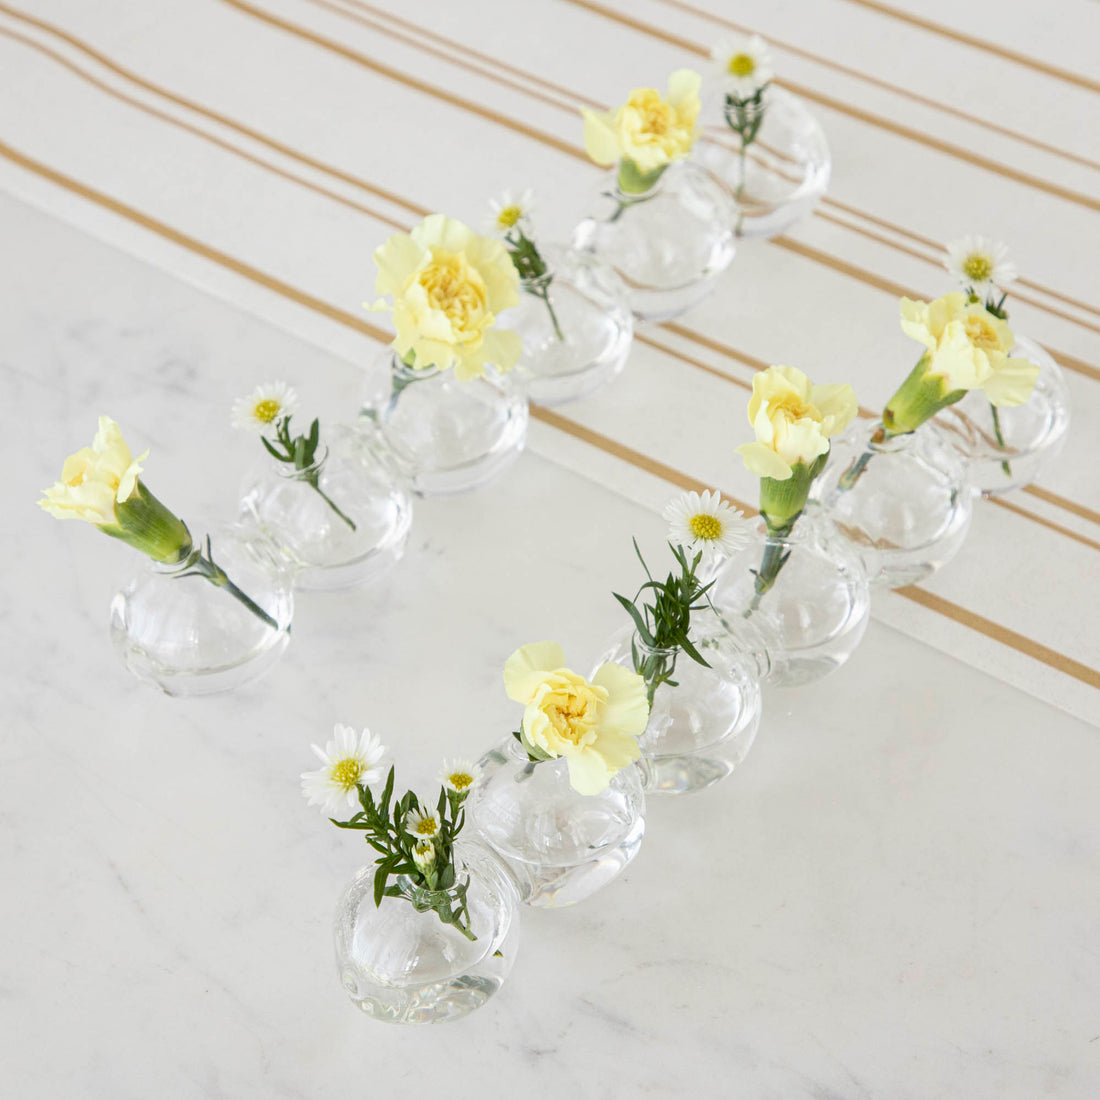 A row of small Chive Caterpillar Vases each containing a single yellow carnation, arranged on a striped surface against a marble background.